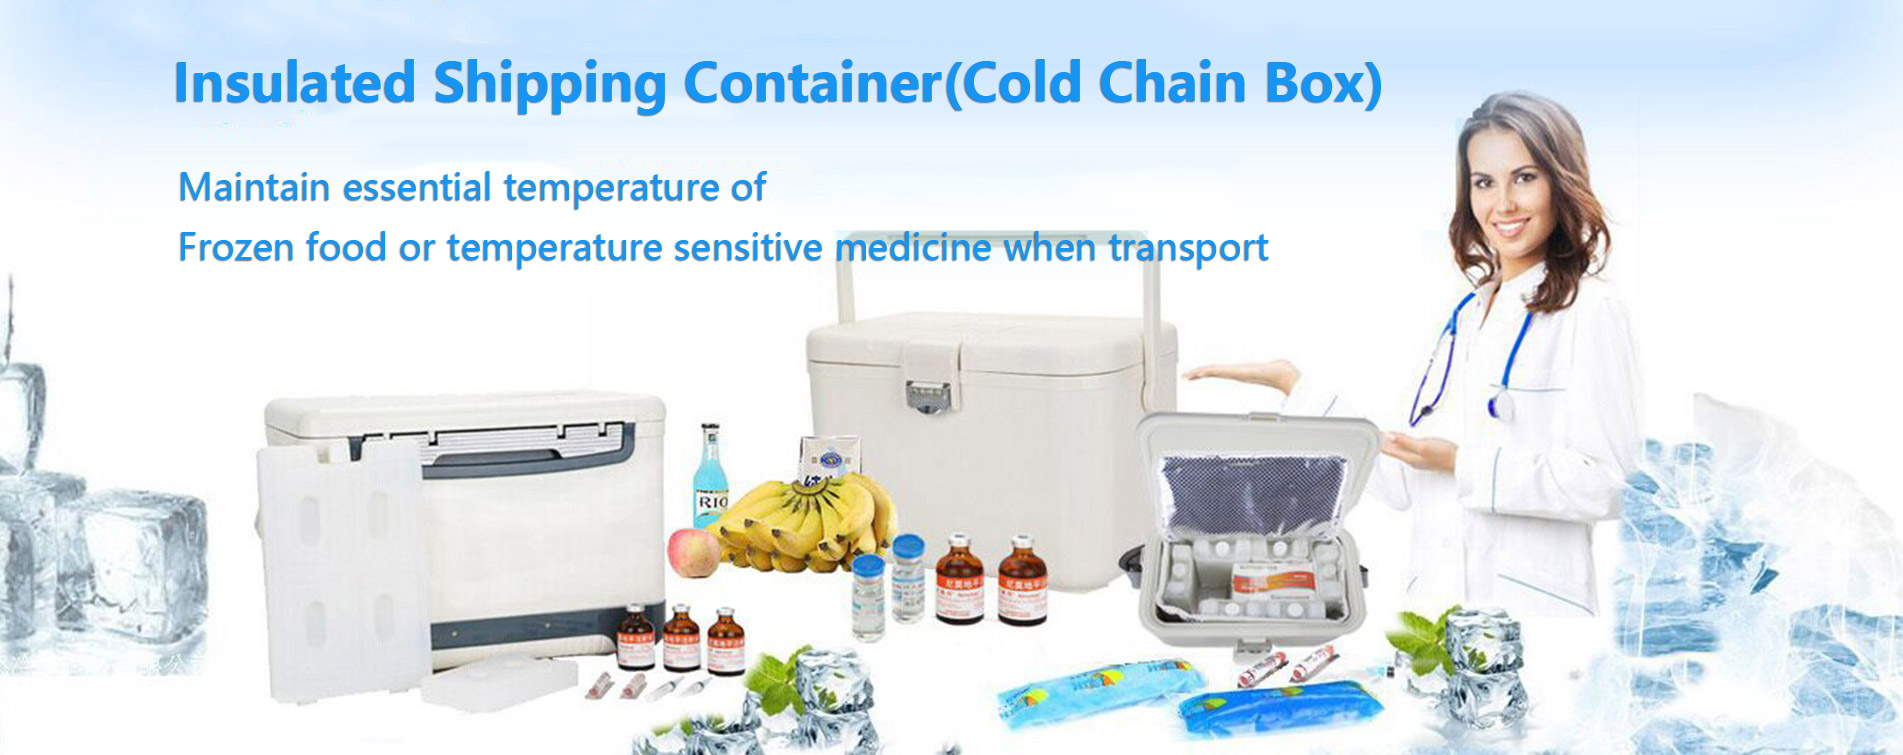 Insulated Shipping Container, Cold Chain Box